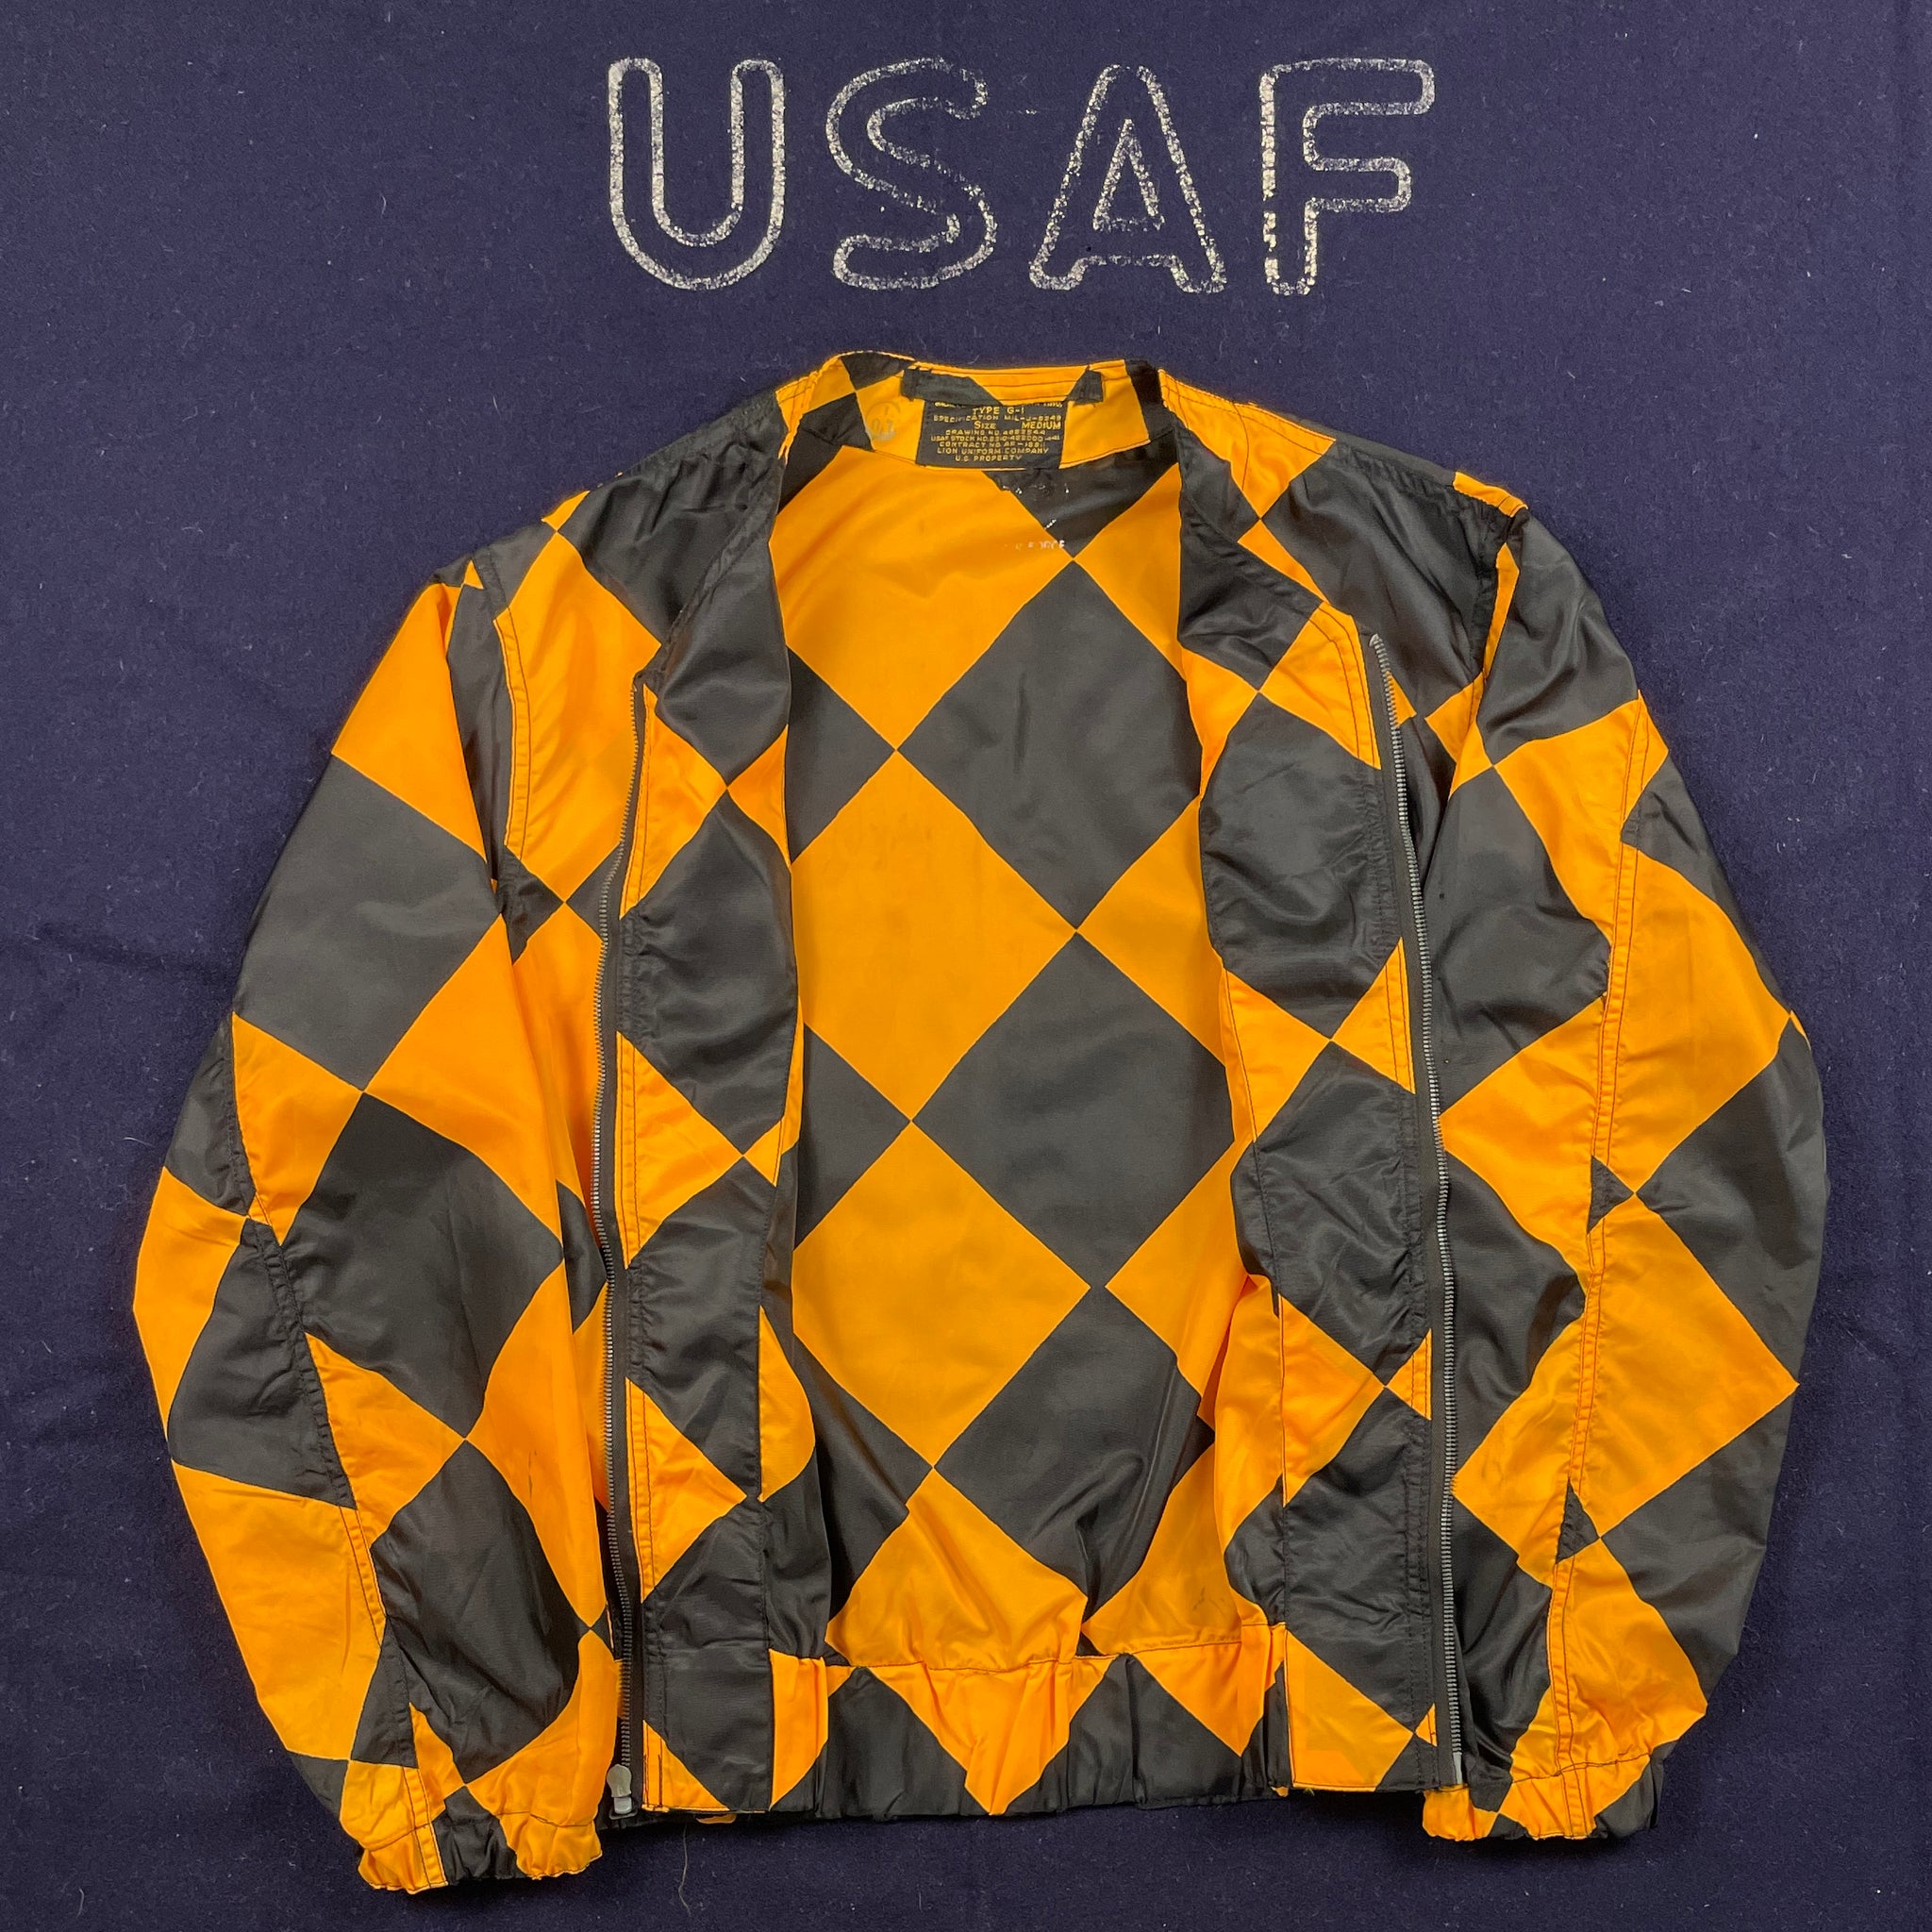 USAF G1 Linecrewman Ground Crew Jacket – The Major's Tailor